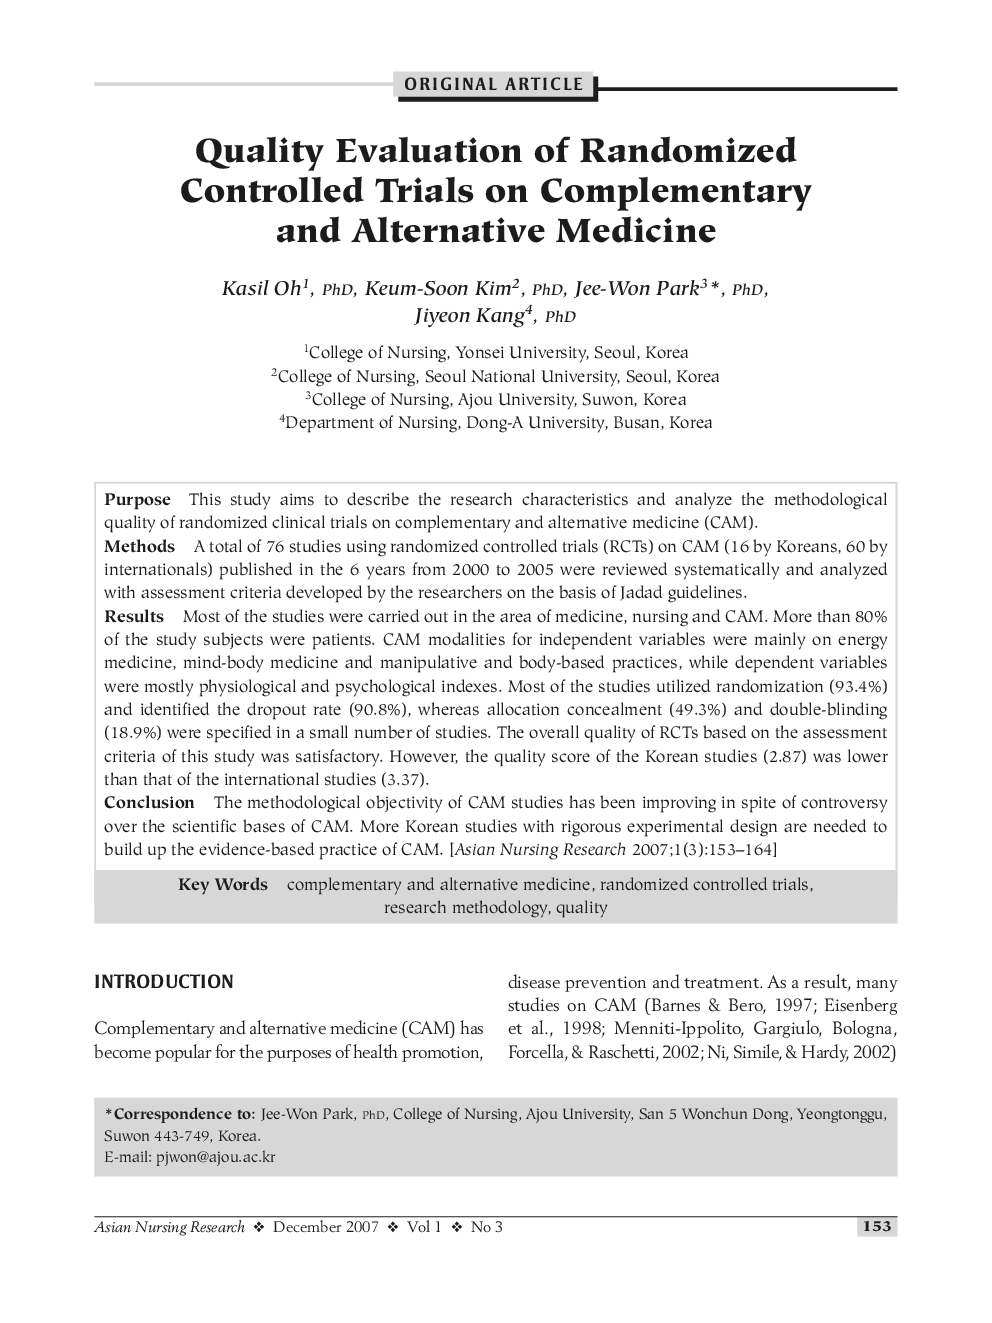 Quality Evaluation of Randomized Controlled Trials on Complementary and Alternative Medicine